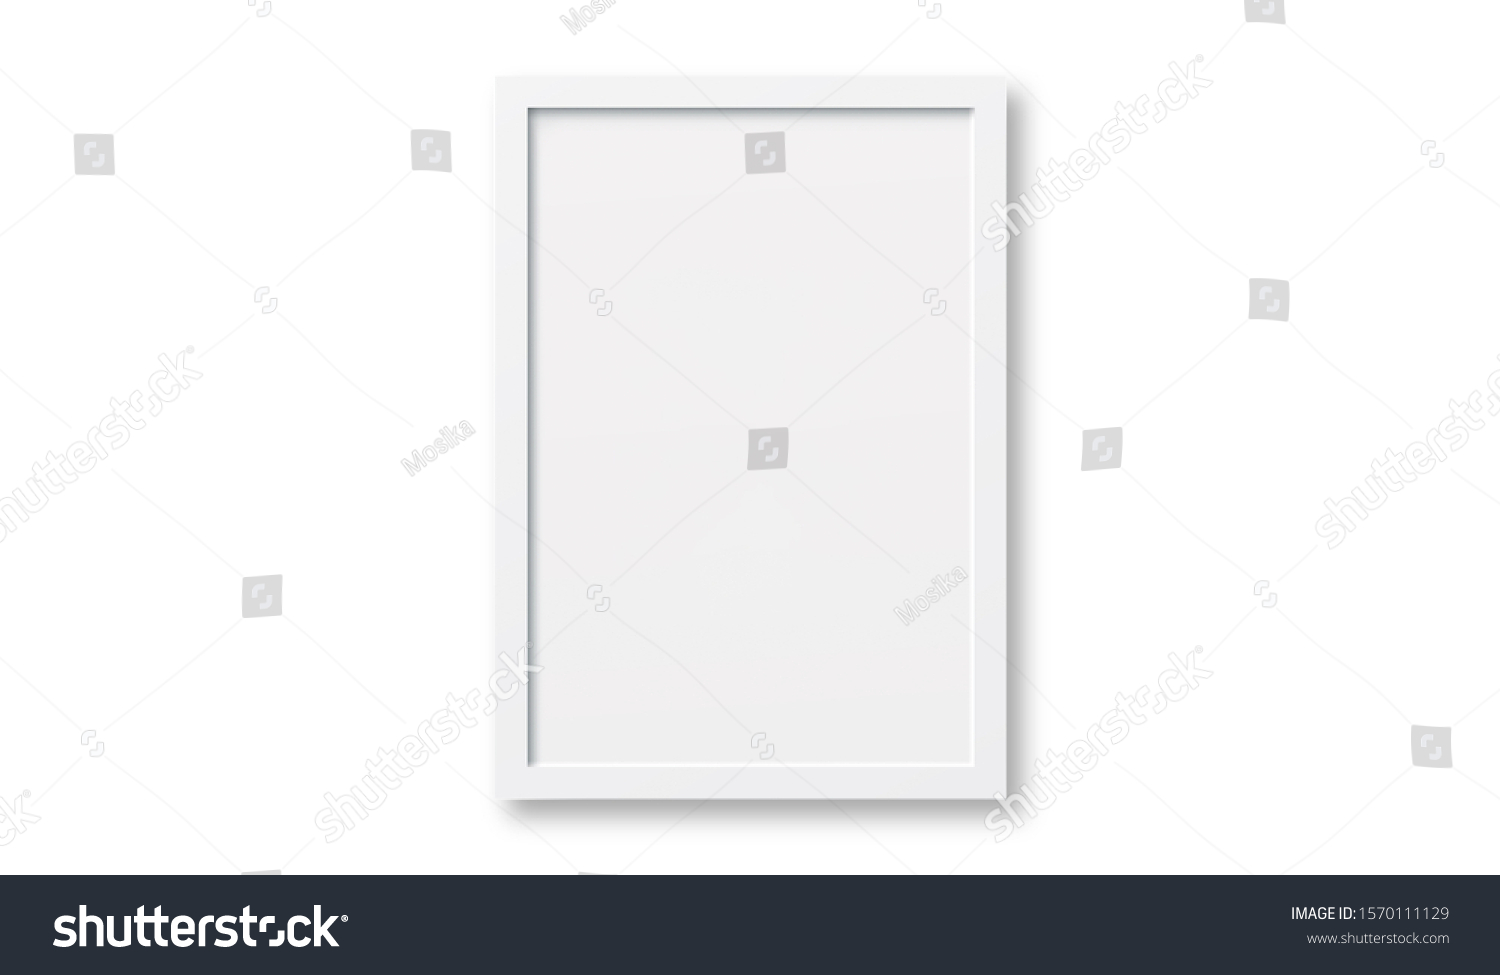 435,541 White wooden photo background Images, Stock Photos & Vectors ...